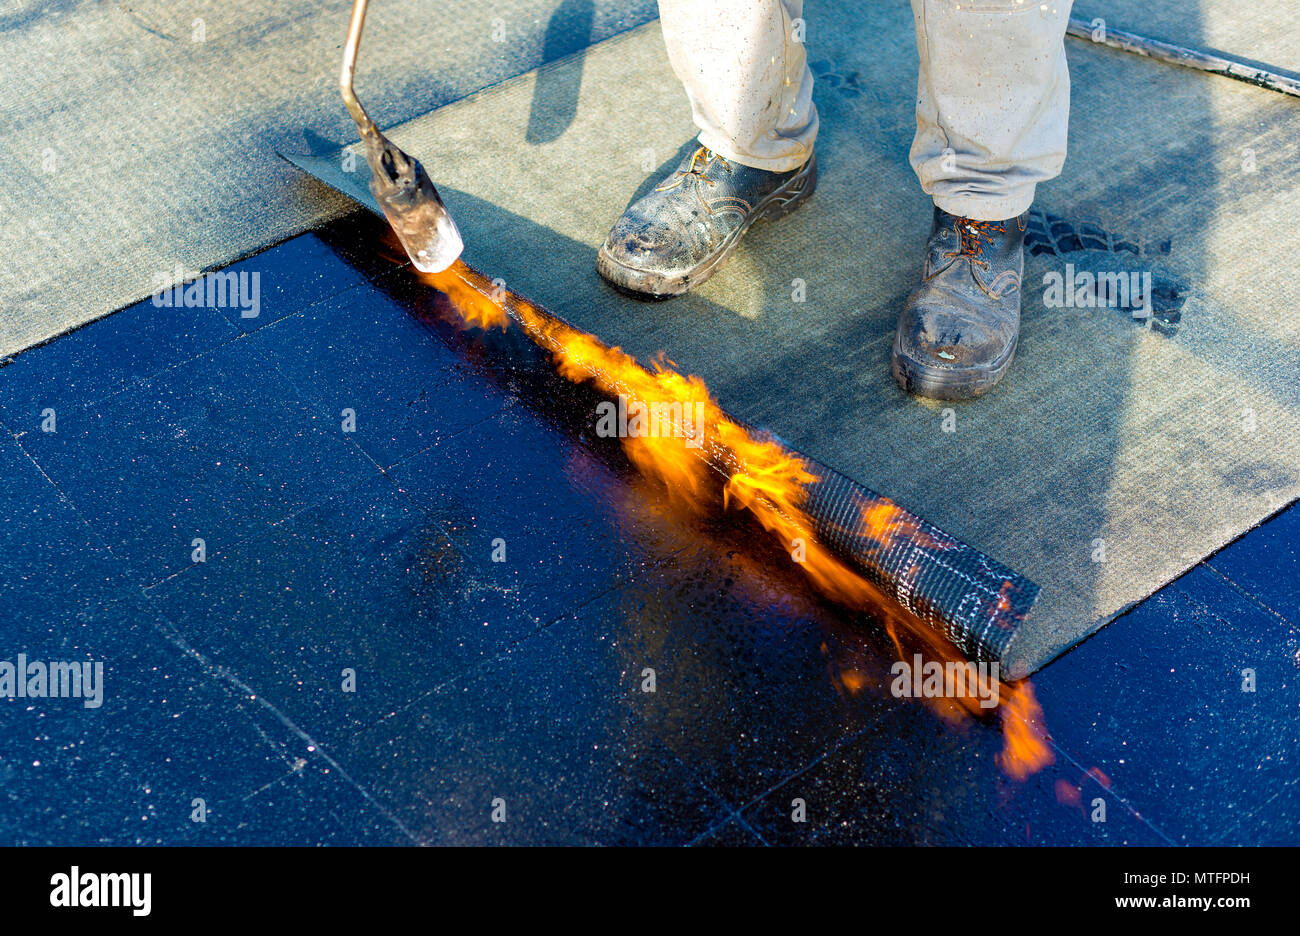 Worker preparing part of bitumen roofing felt roll for melting by gas heater torch flame Stock Photo